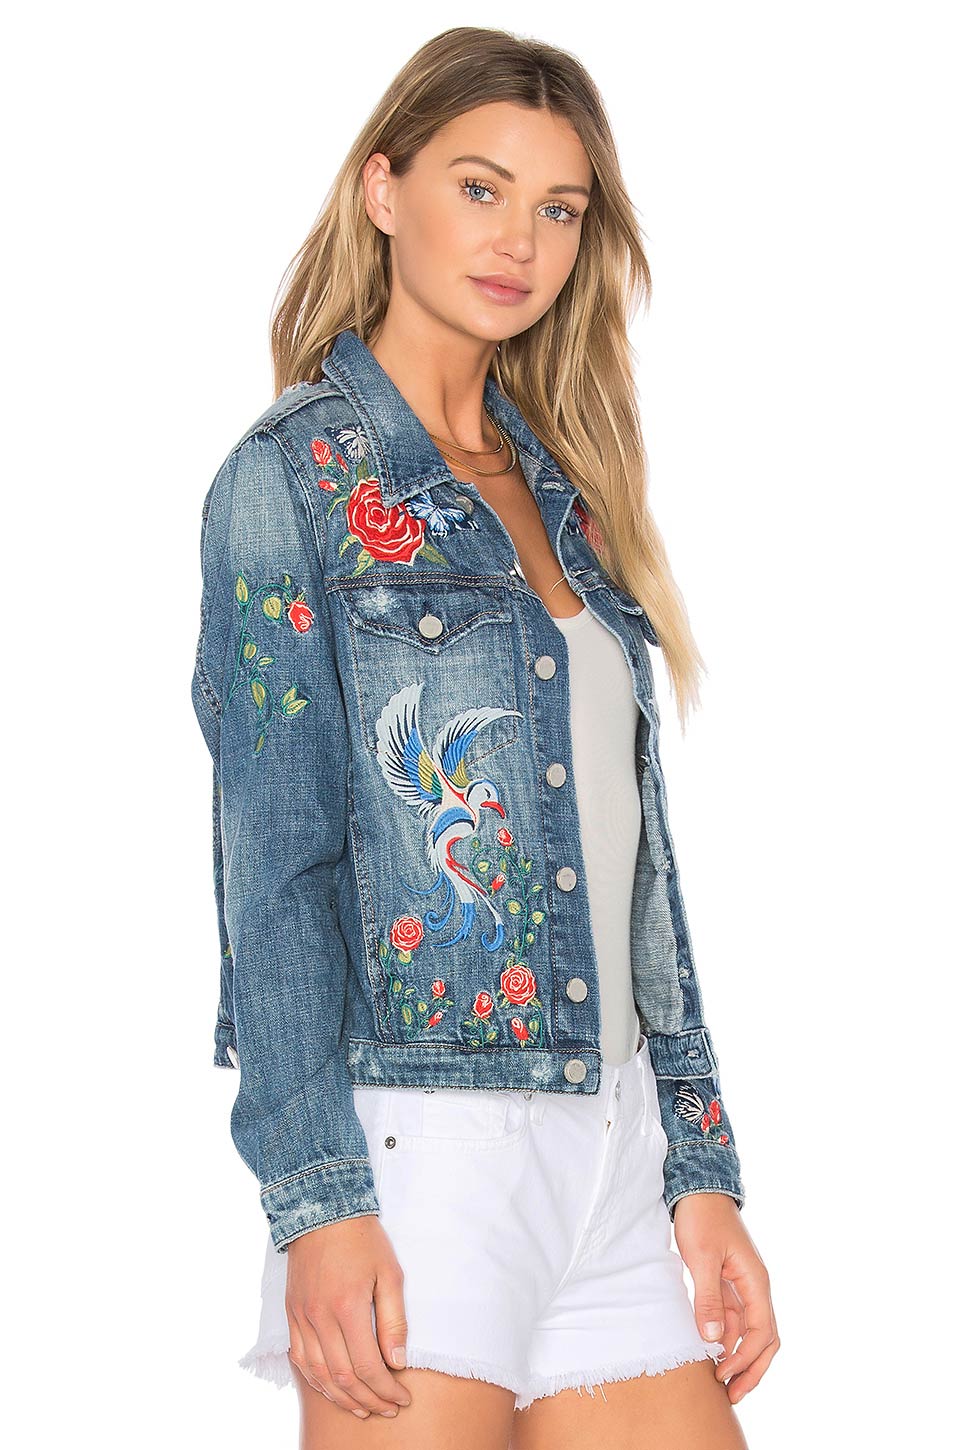 Find Of The Week: BLANK NYC Embroidered Denim Jacket – THE JEANS BLOG